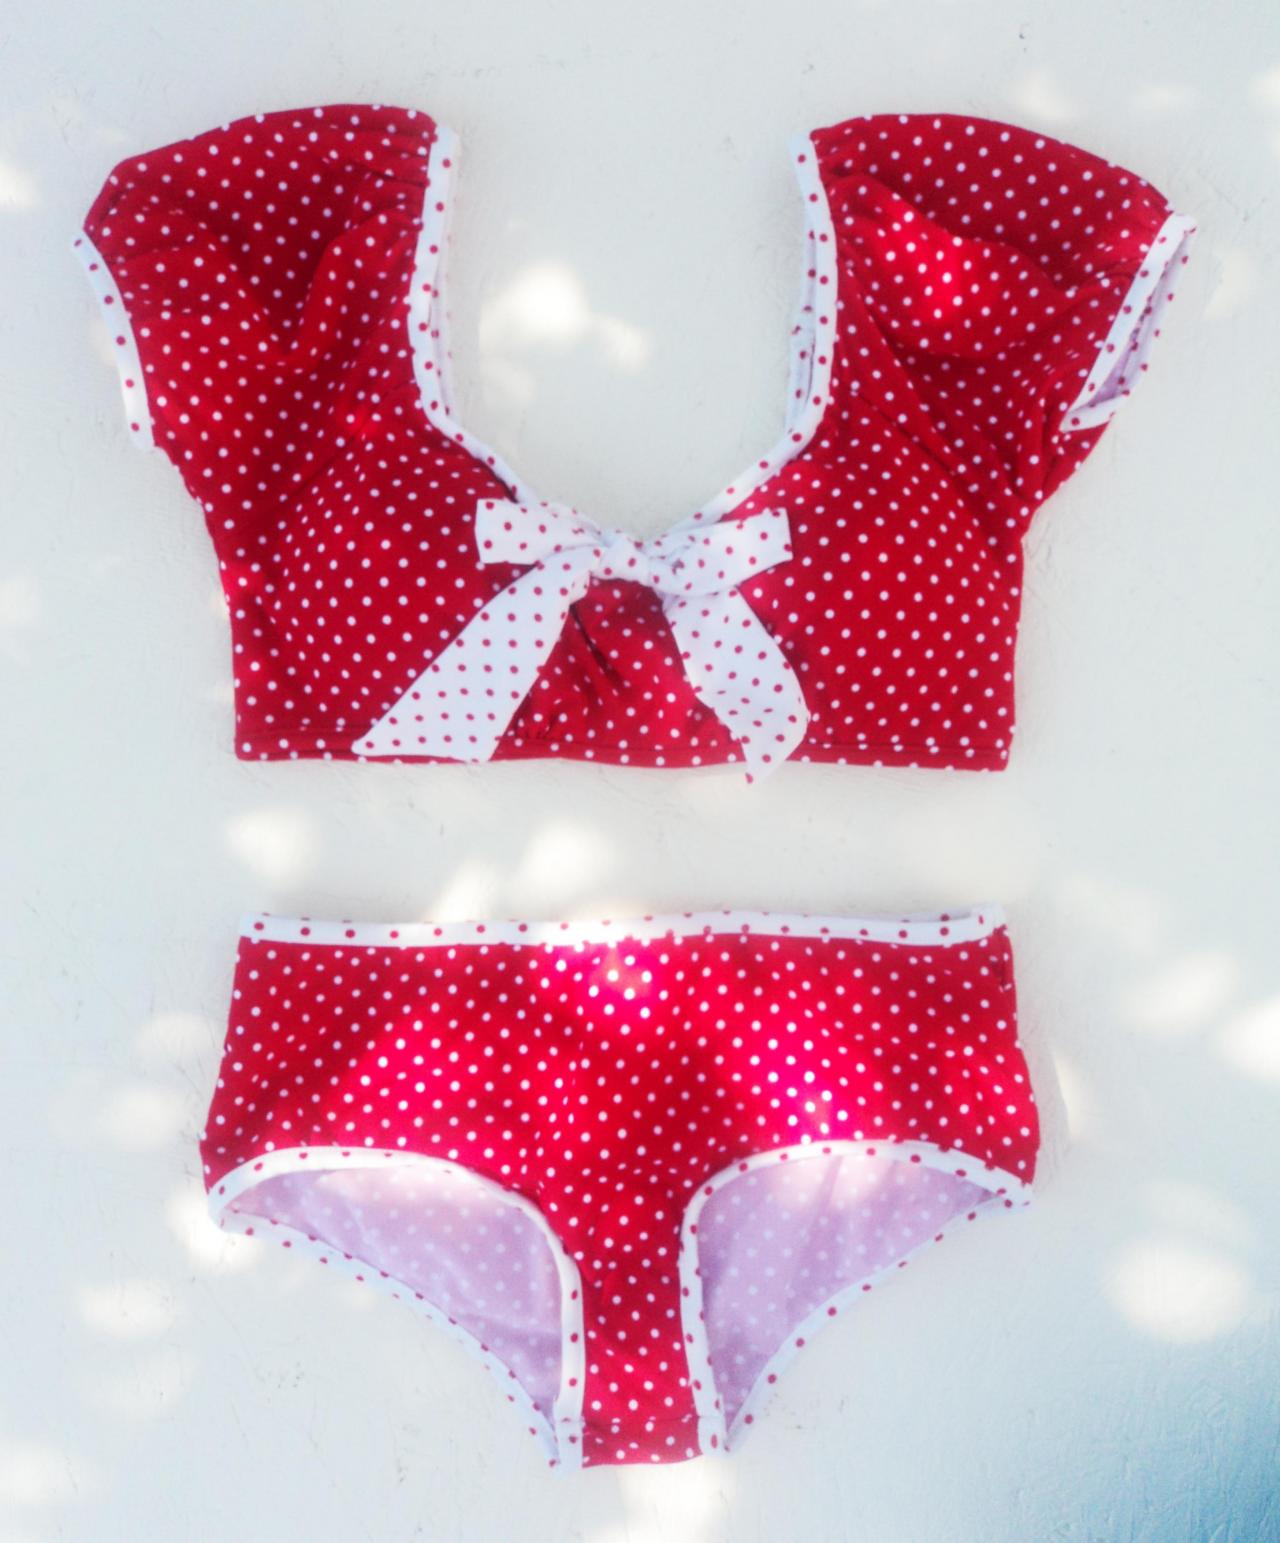 !! Cute & Playful Crop Top Design Two Pieces Bikini For Polka Dots Lovers!